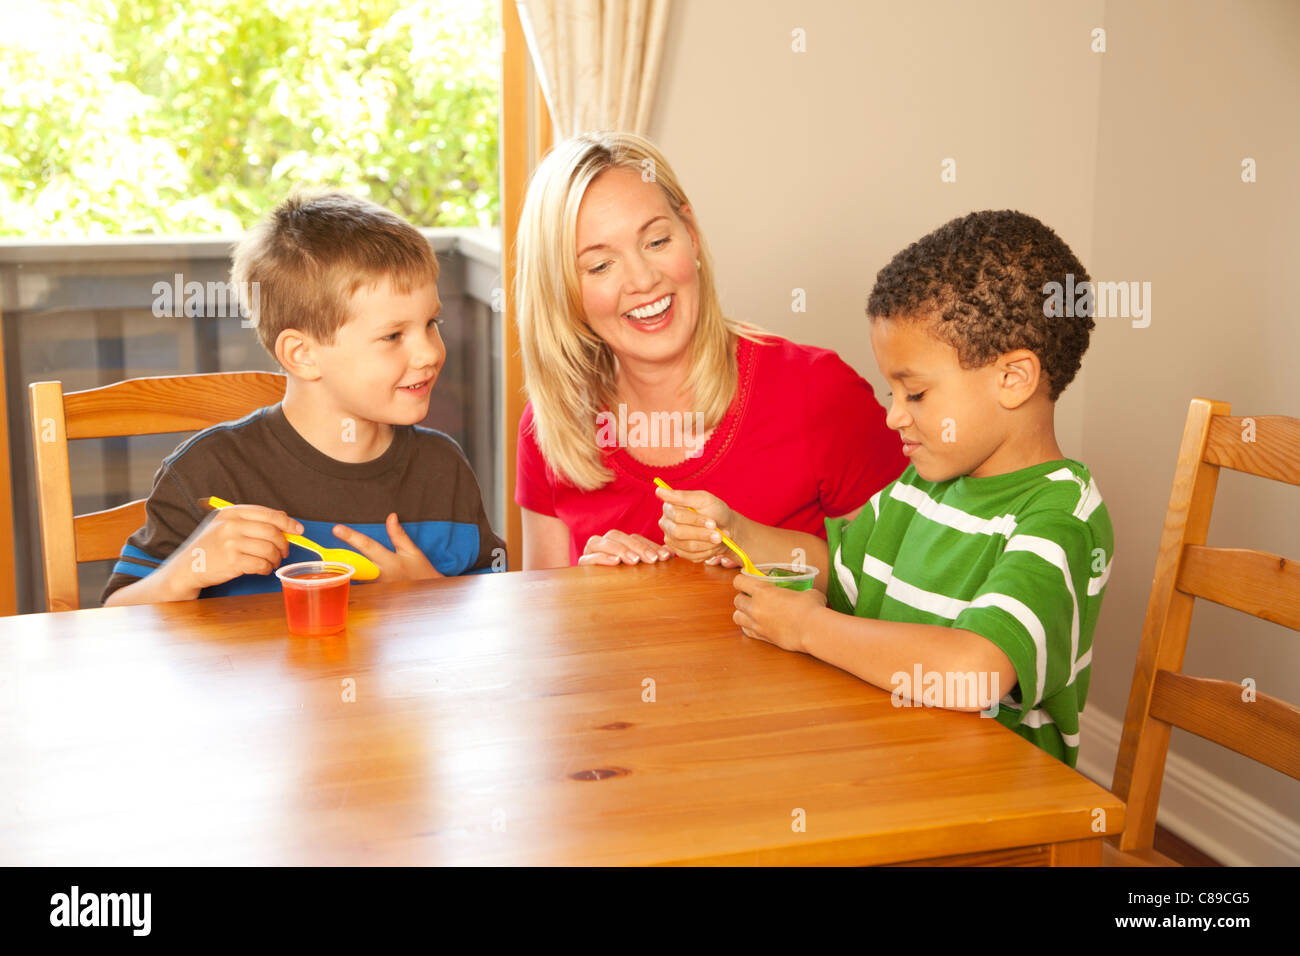 Mother and boys at a kitchen table eating Jell-O Stock Photo